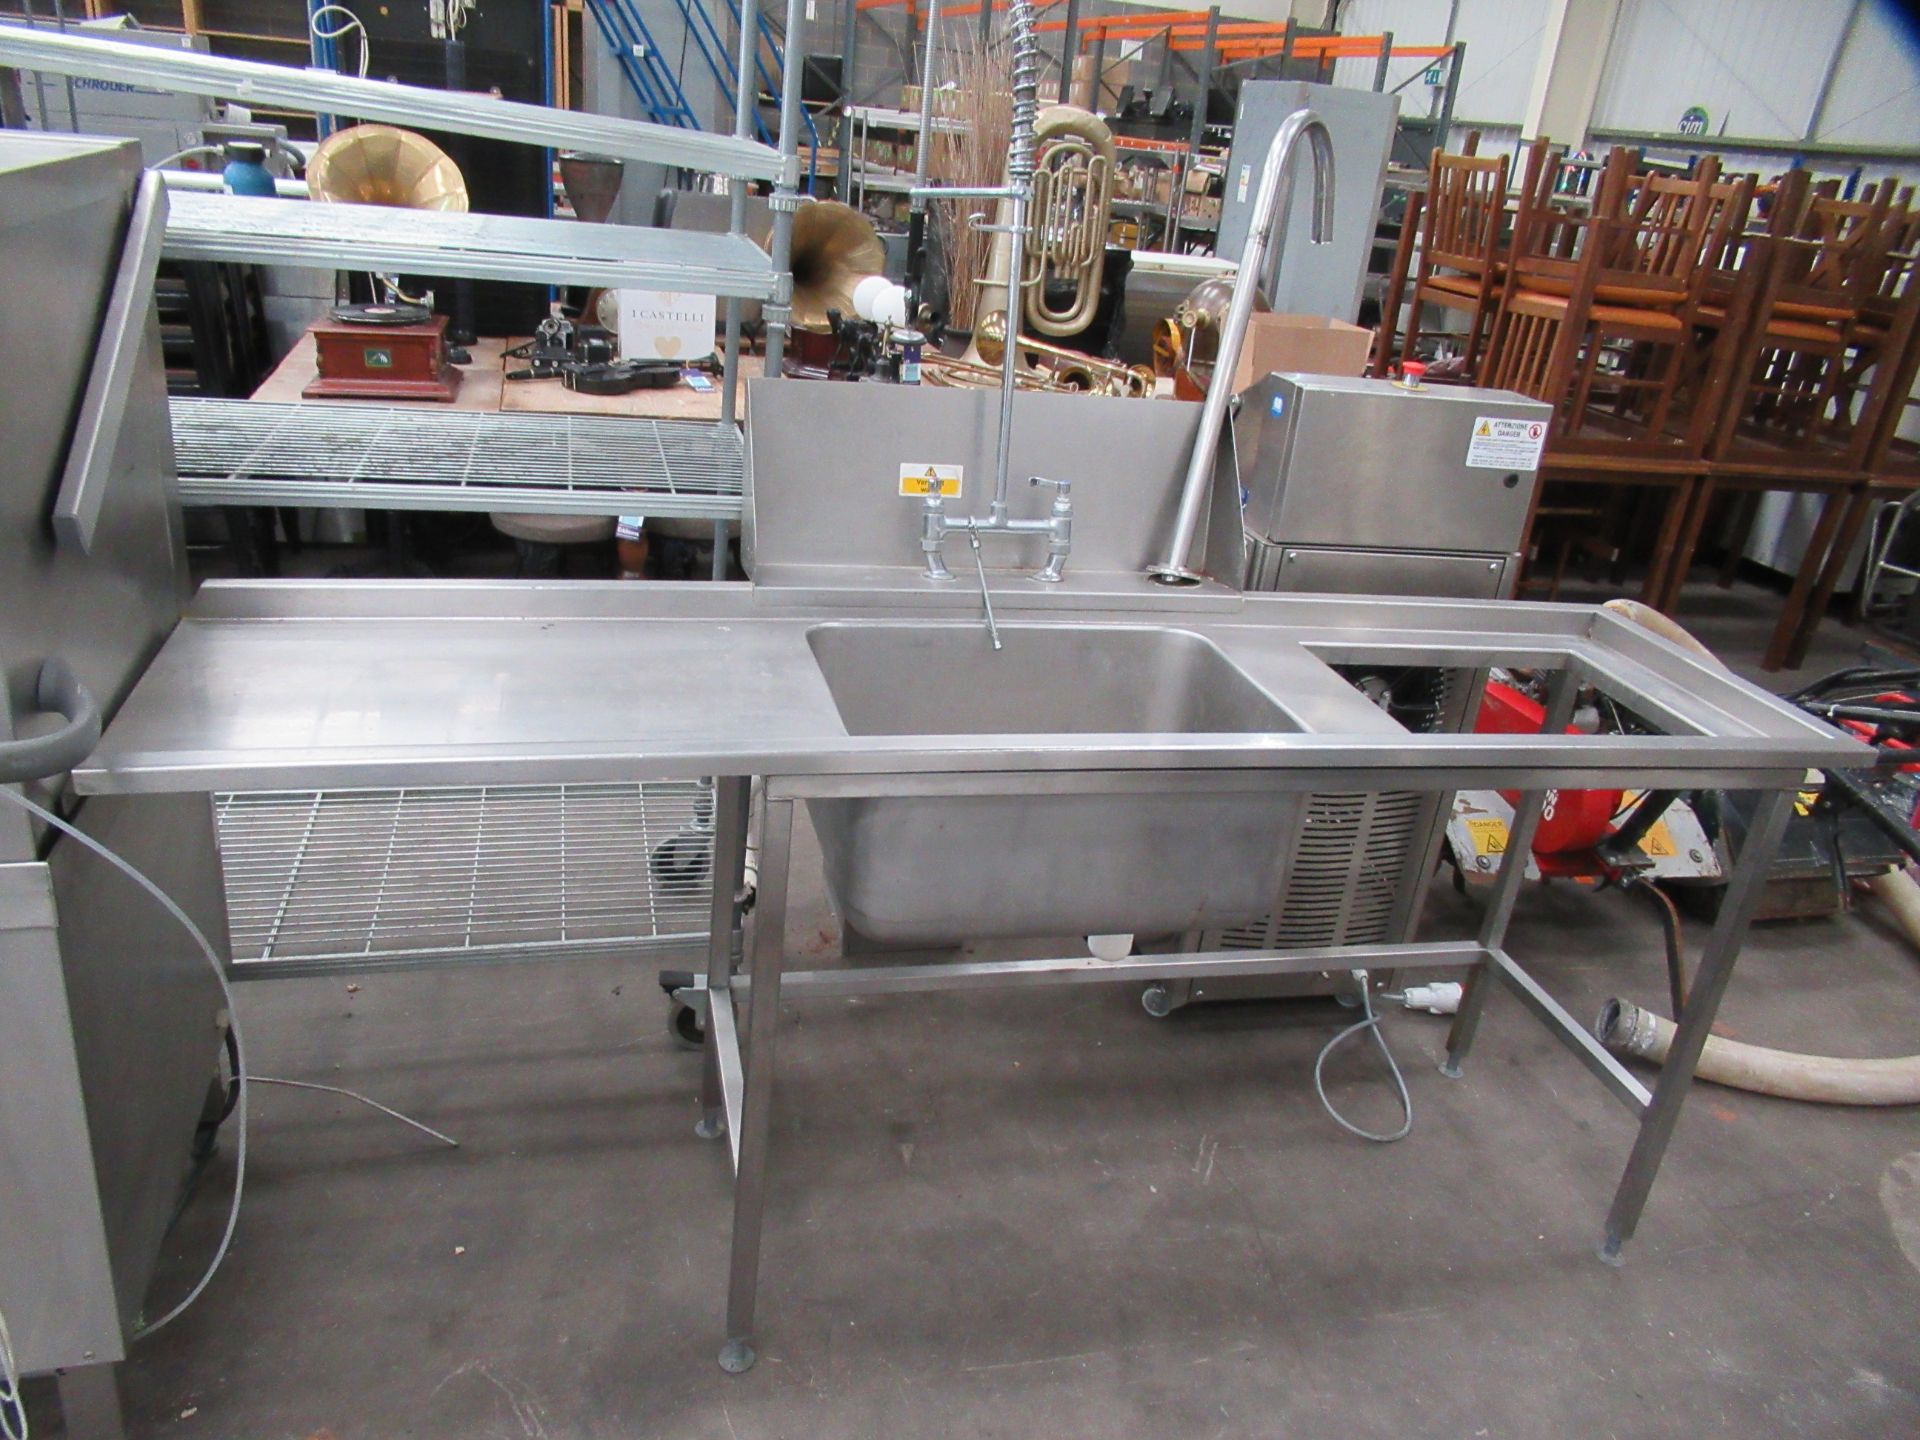 Winterhalter Commercial Dishwasher with Sink unit, Collection Table and Tray Storage Unit - Image 7 of 11